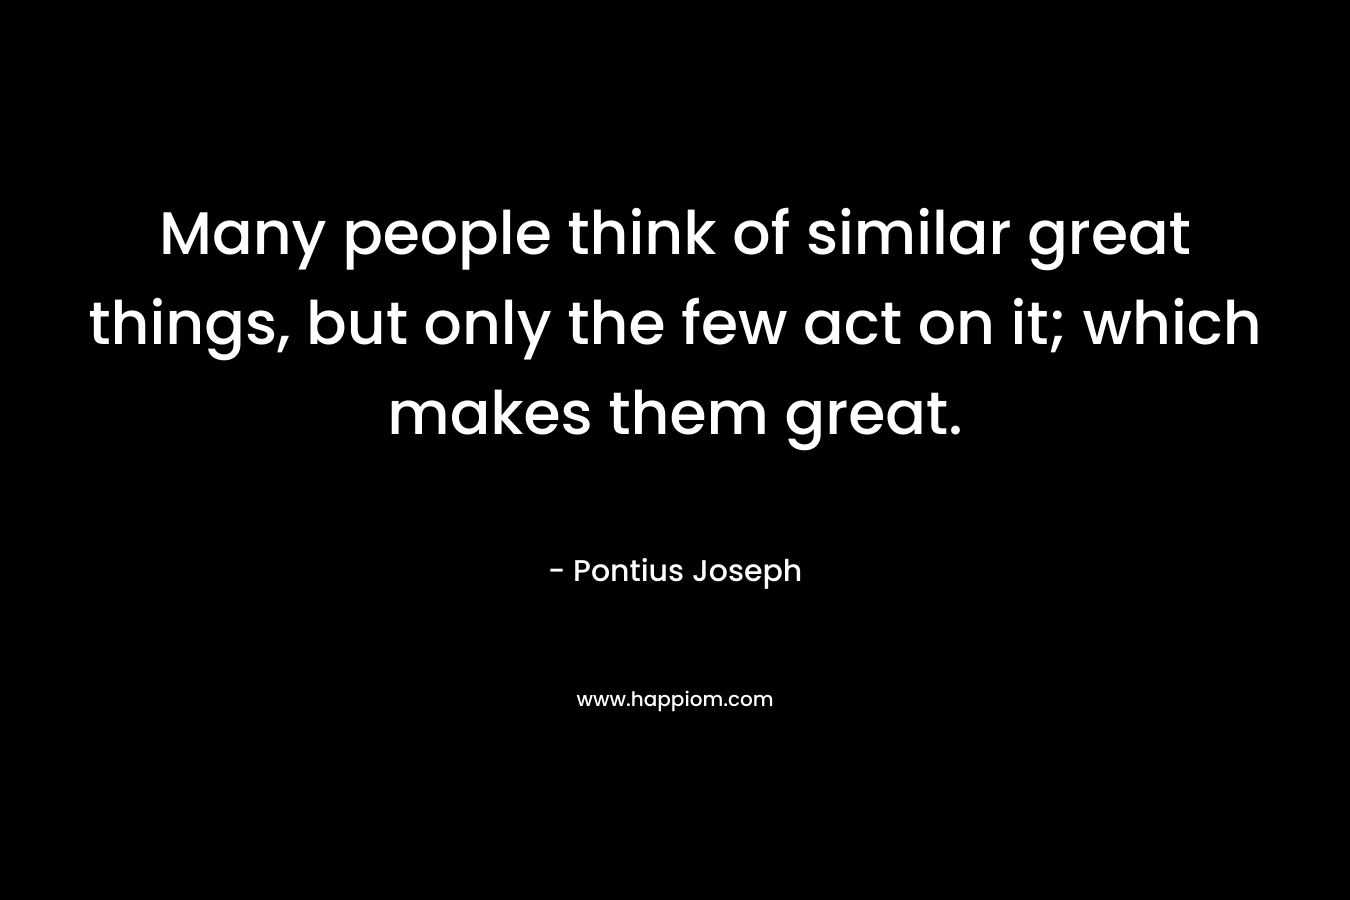 Many people think of similar great things, but only the few act on it; which makes them great. – Pontius Joseph